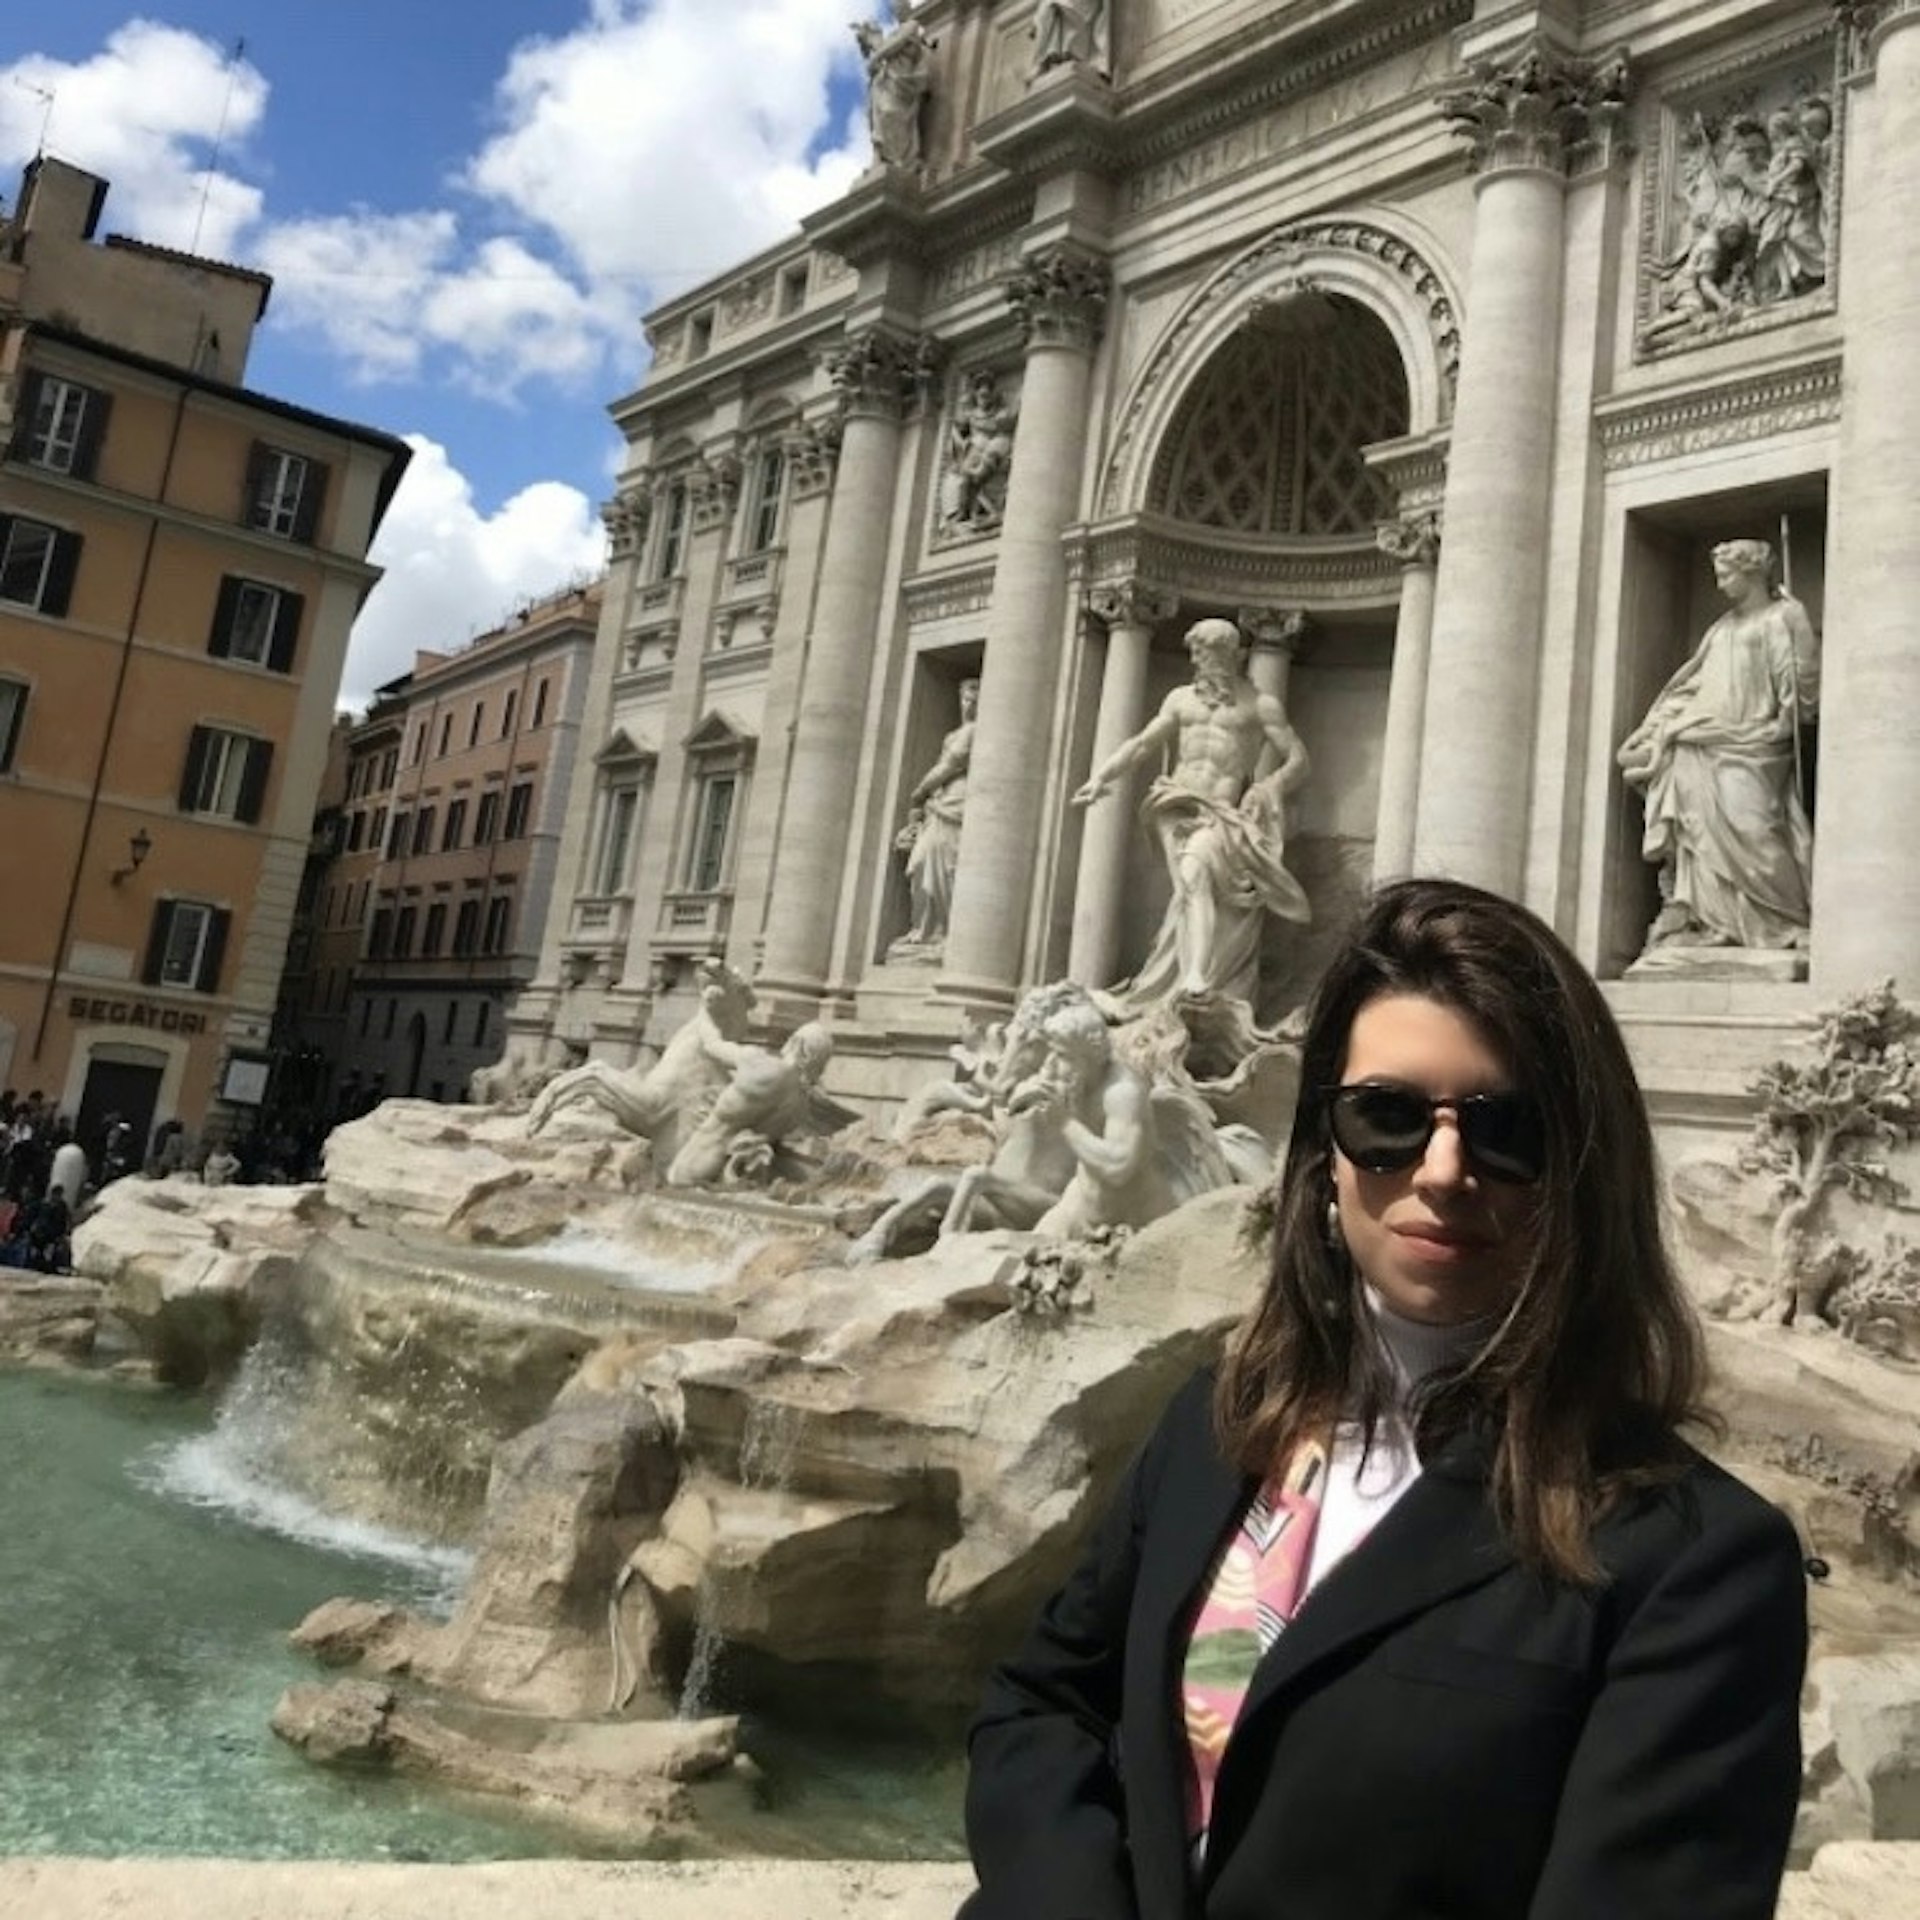 Sasha Brady standing in front of the Trevi Fountain in Rome, Italy